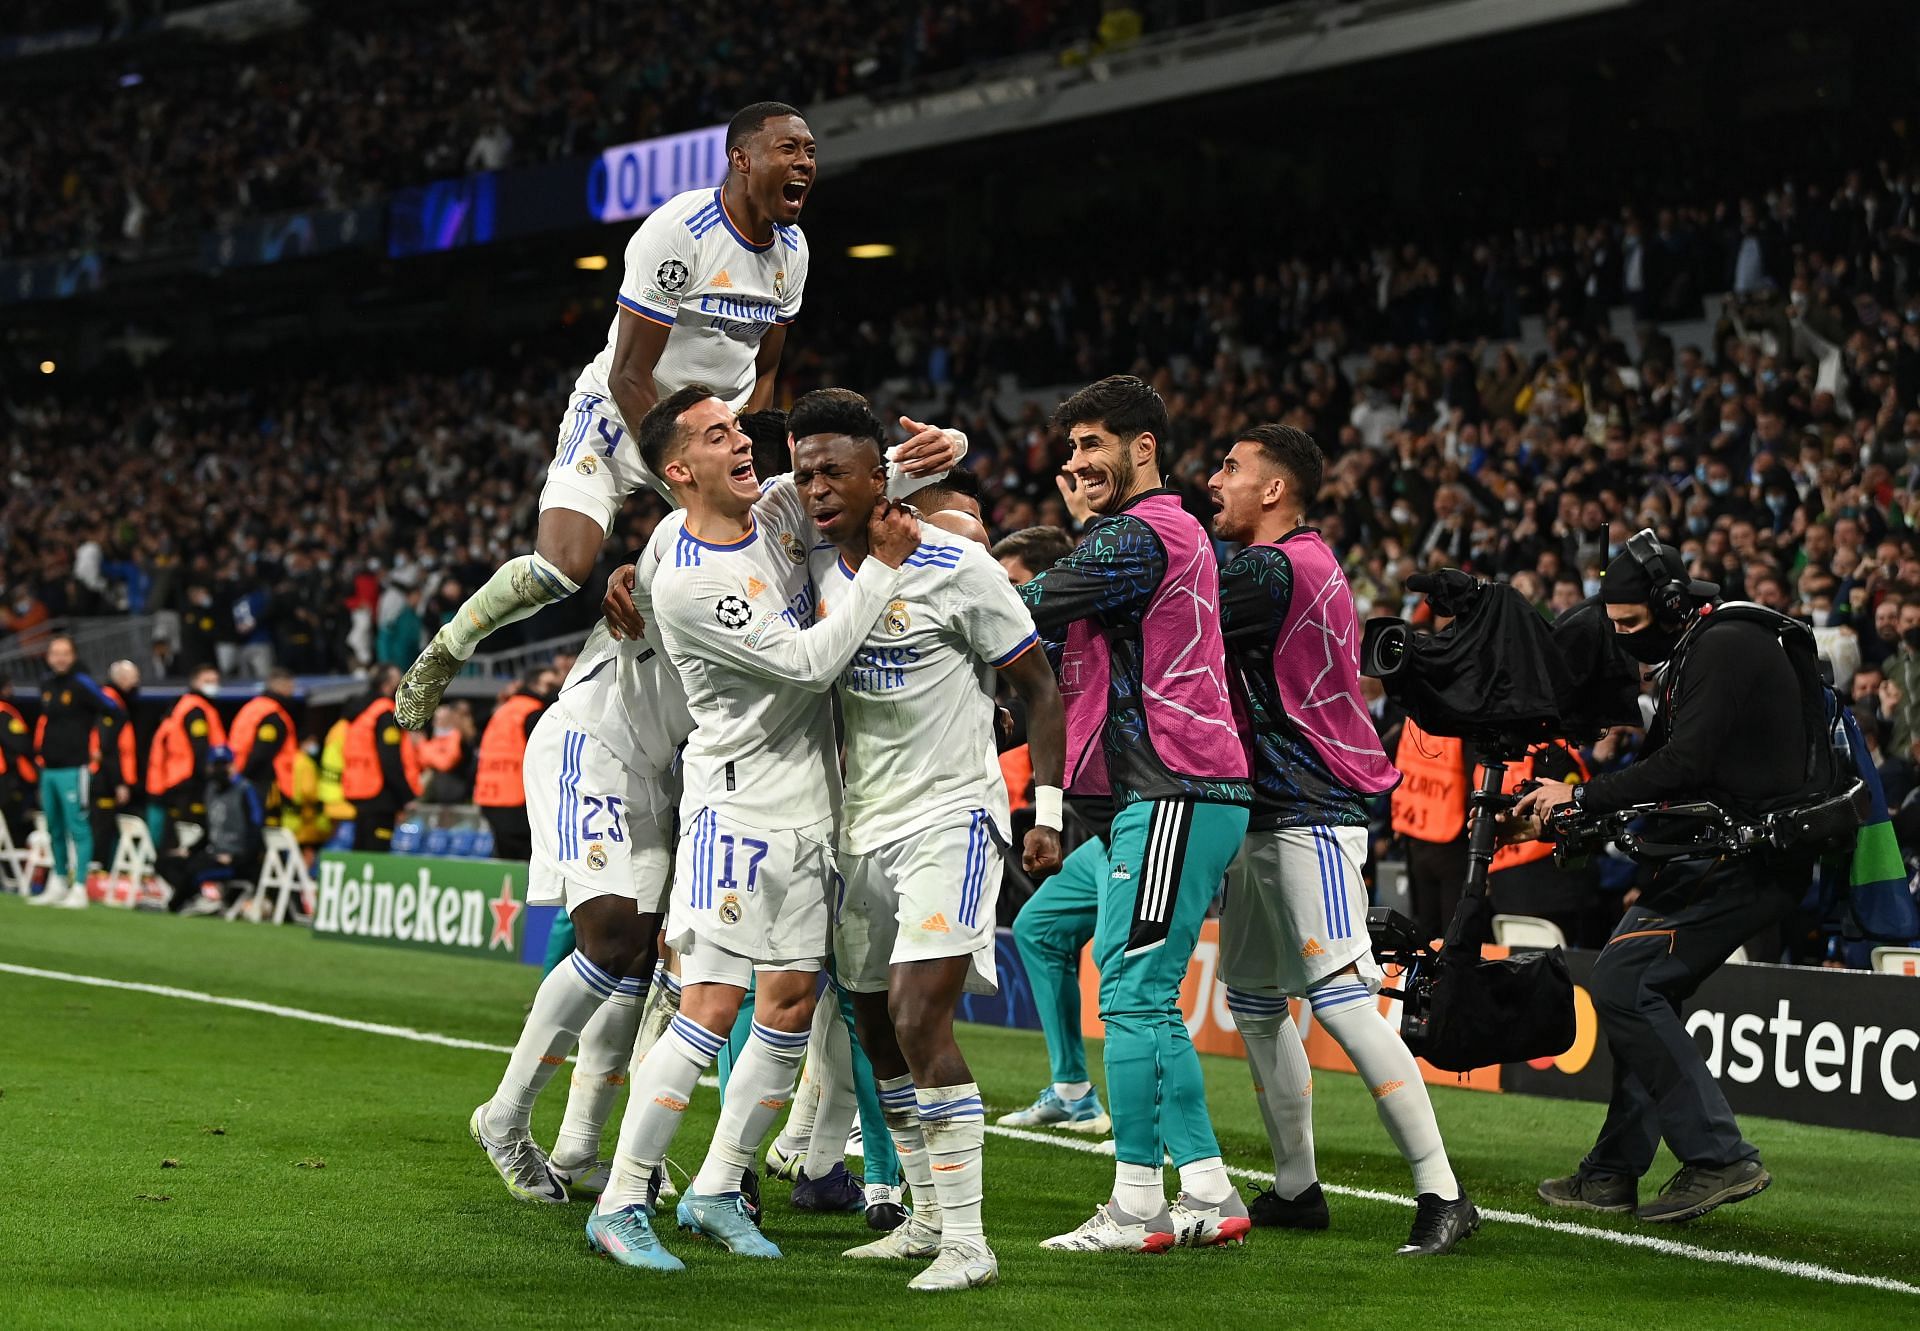 Real Madrid in action against Chelsea in the 2021/22 UCL quarter-final 2nd leg